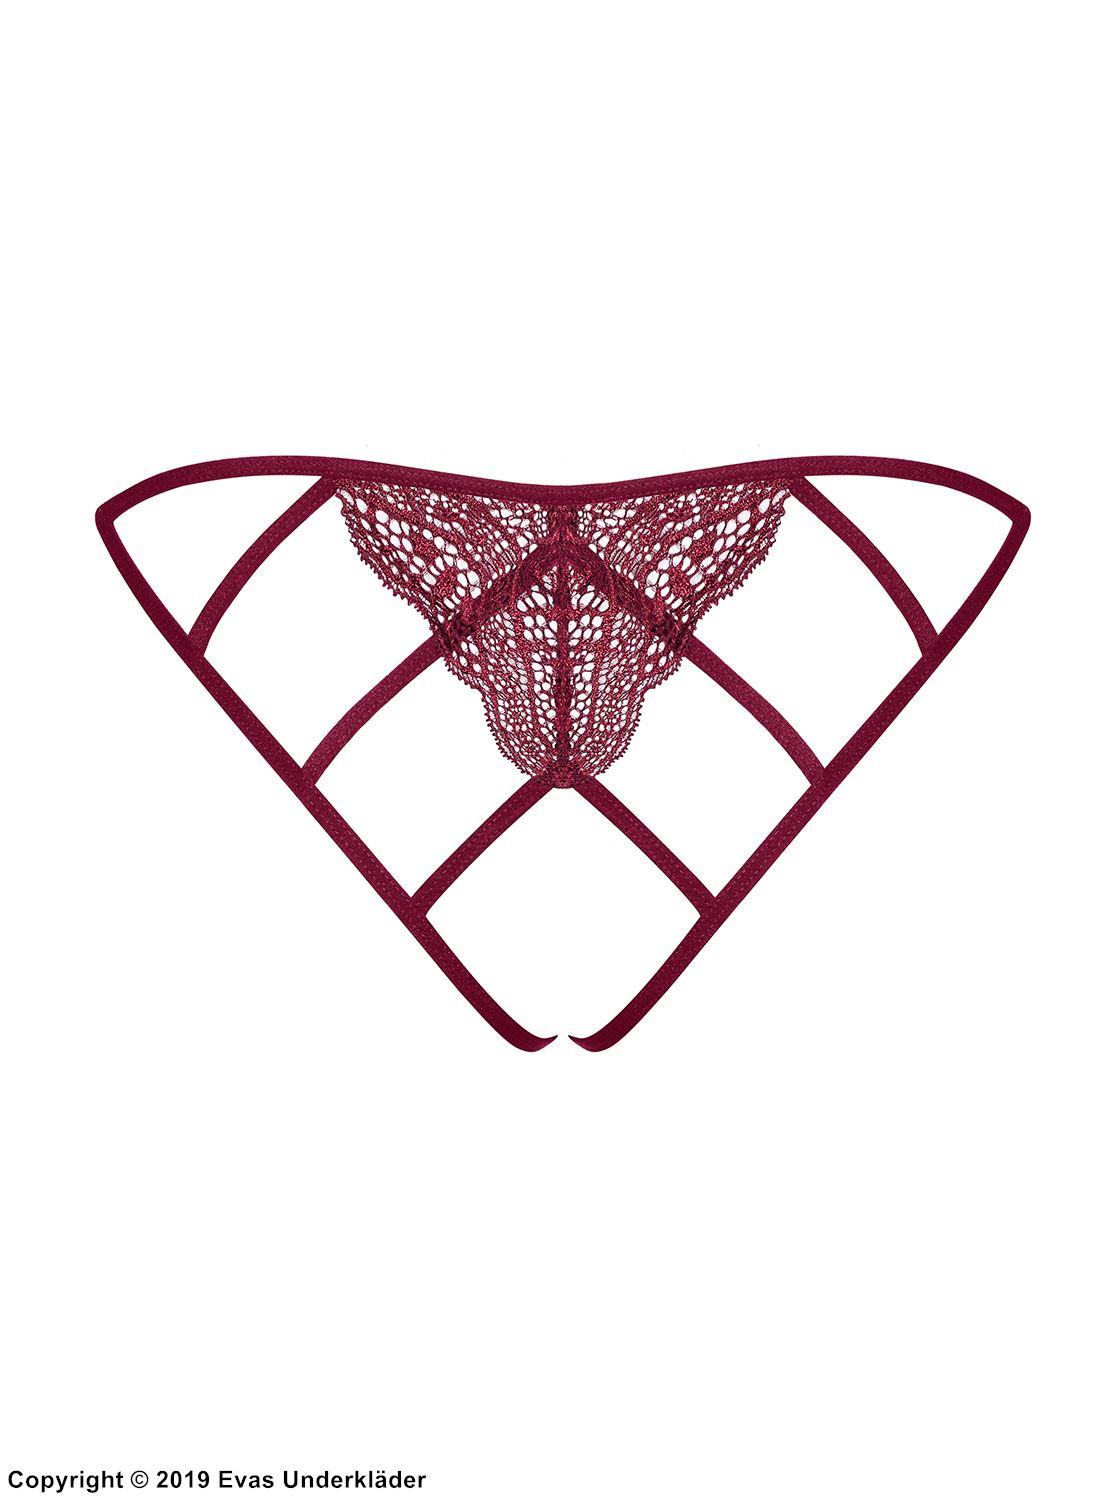 Crotchless panties, openwork lace, thin straps